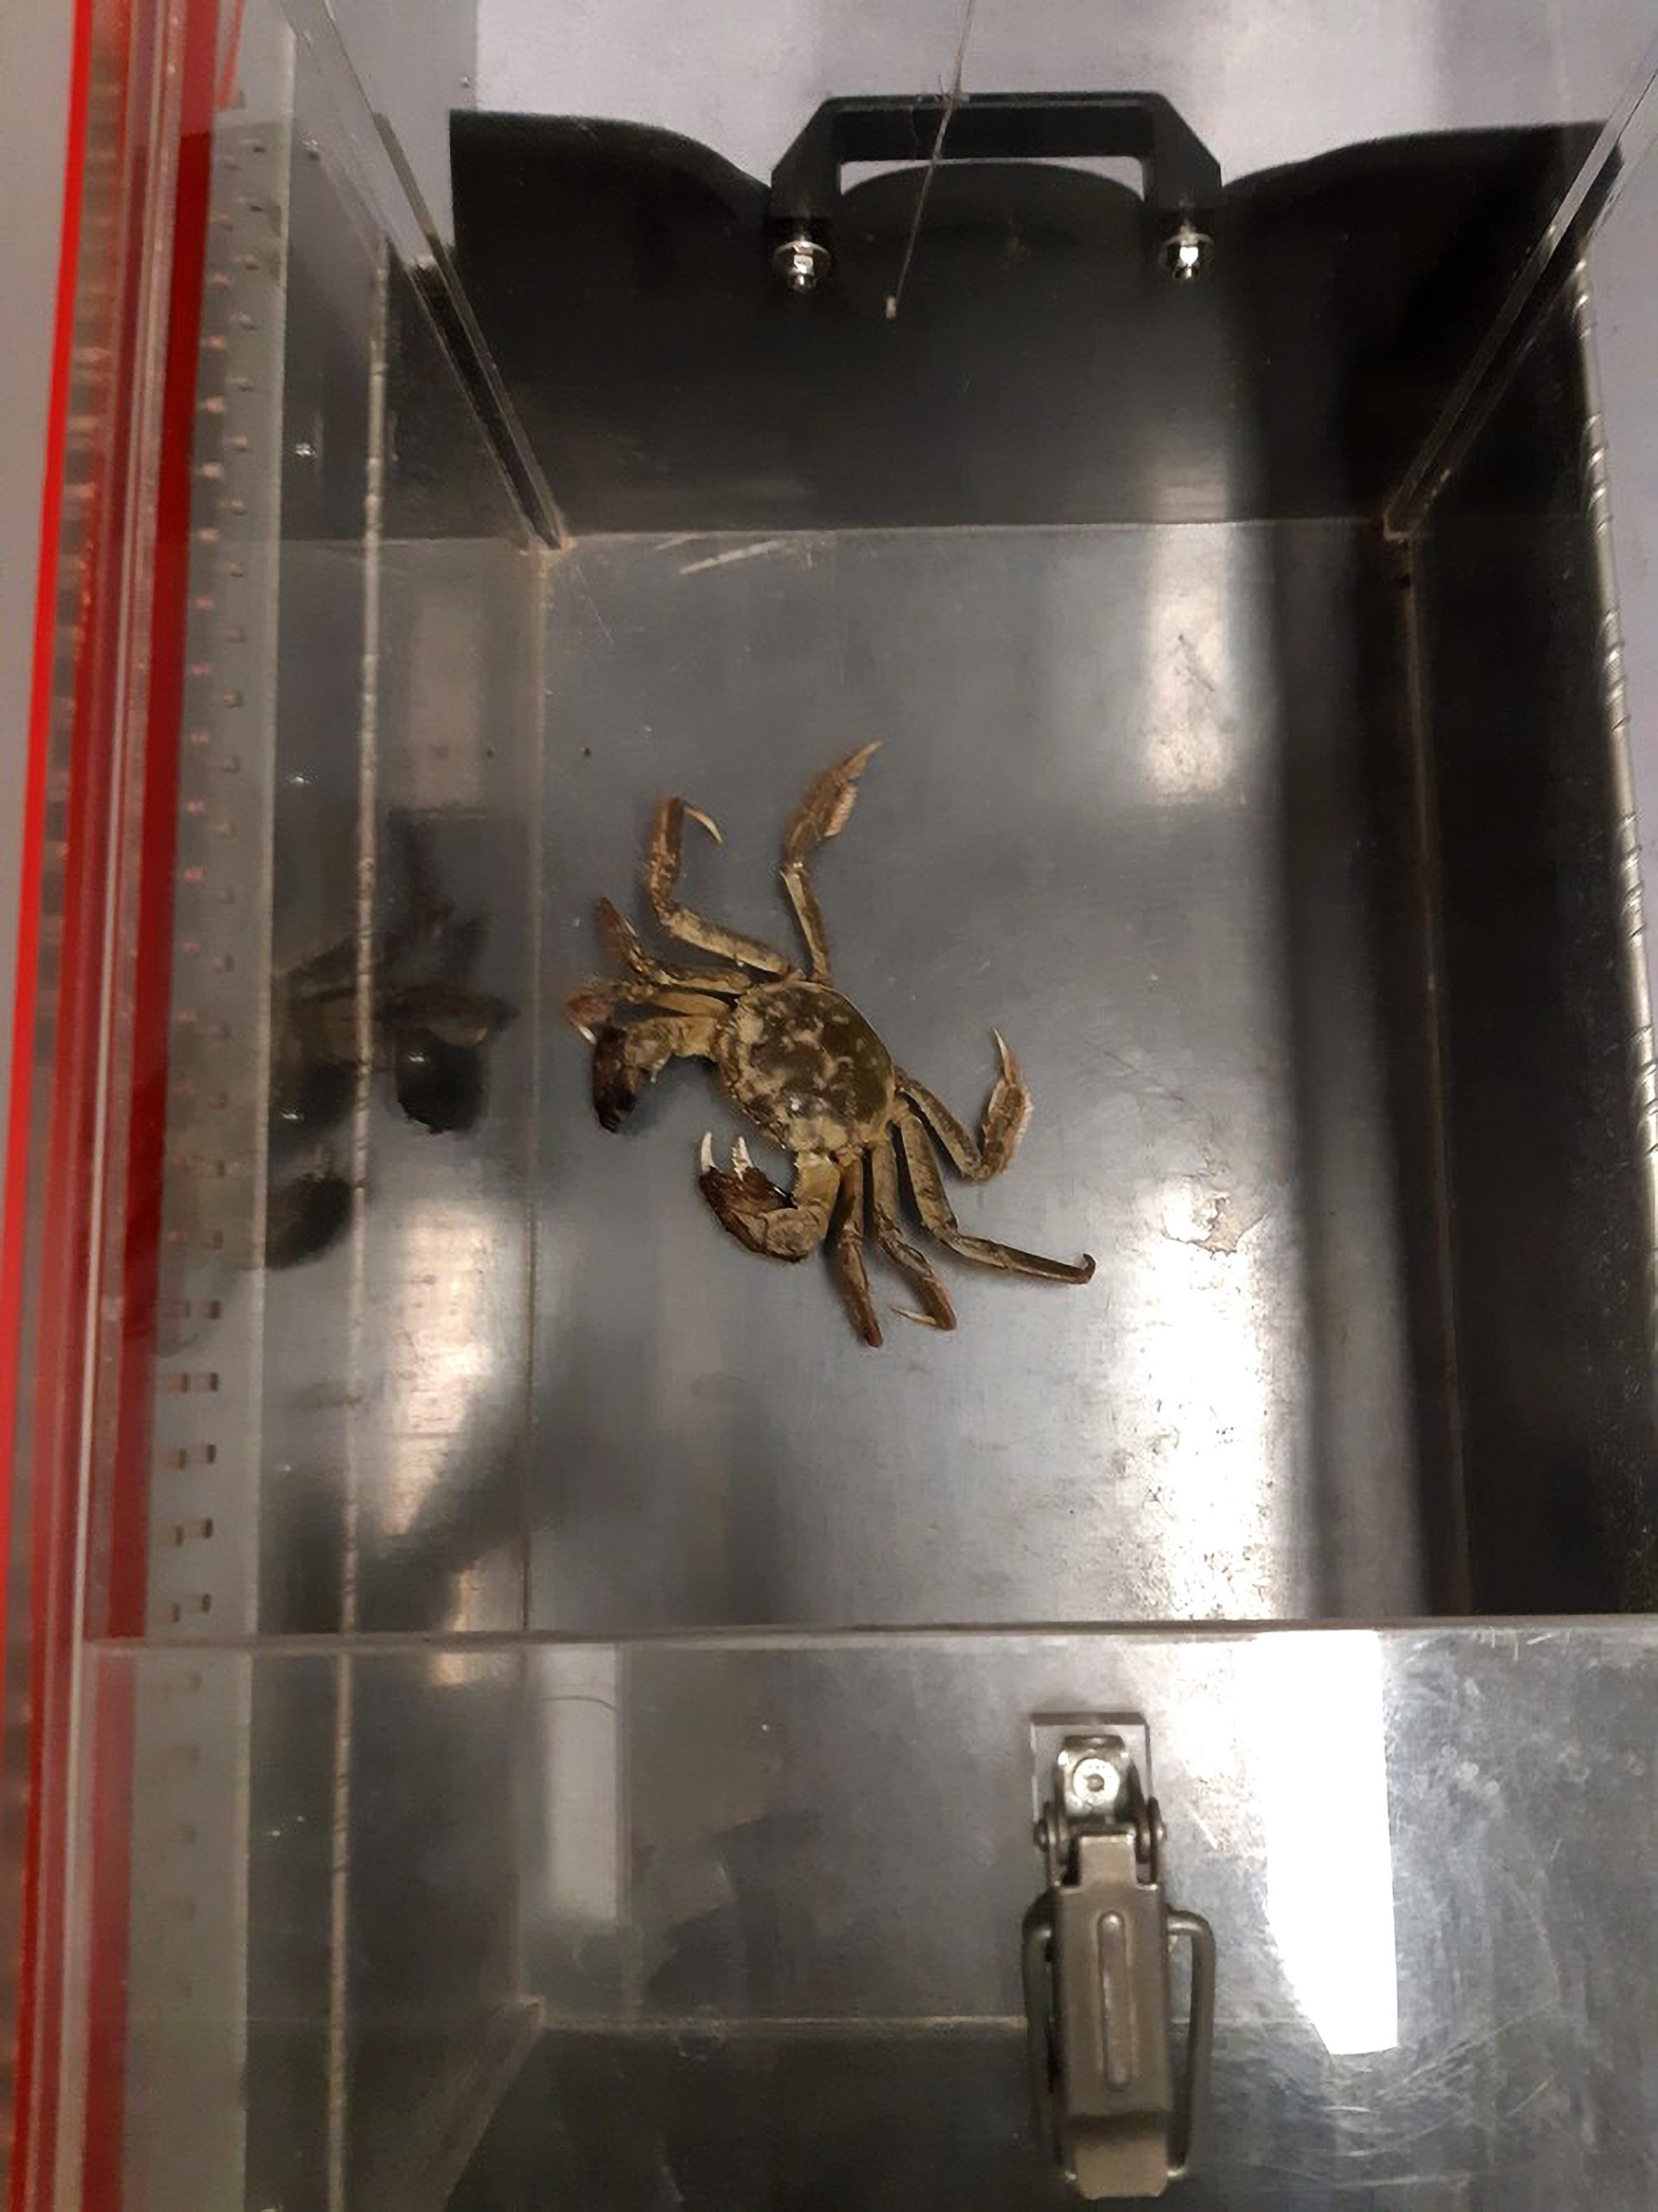 Read more about the article Crab Taken Into Custody After Being Caught Fare Dodging At German Train Station